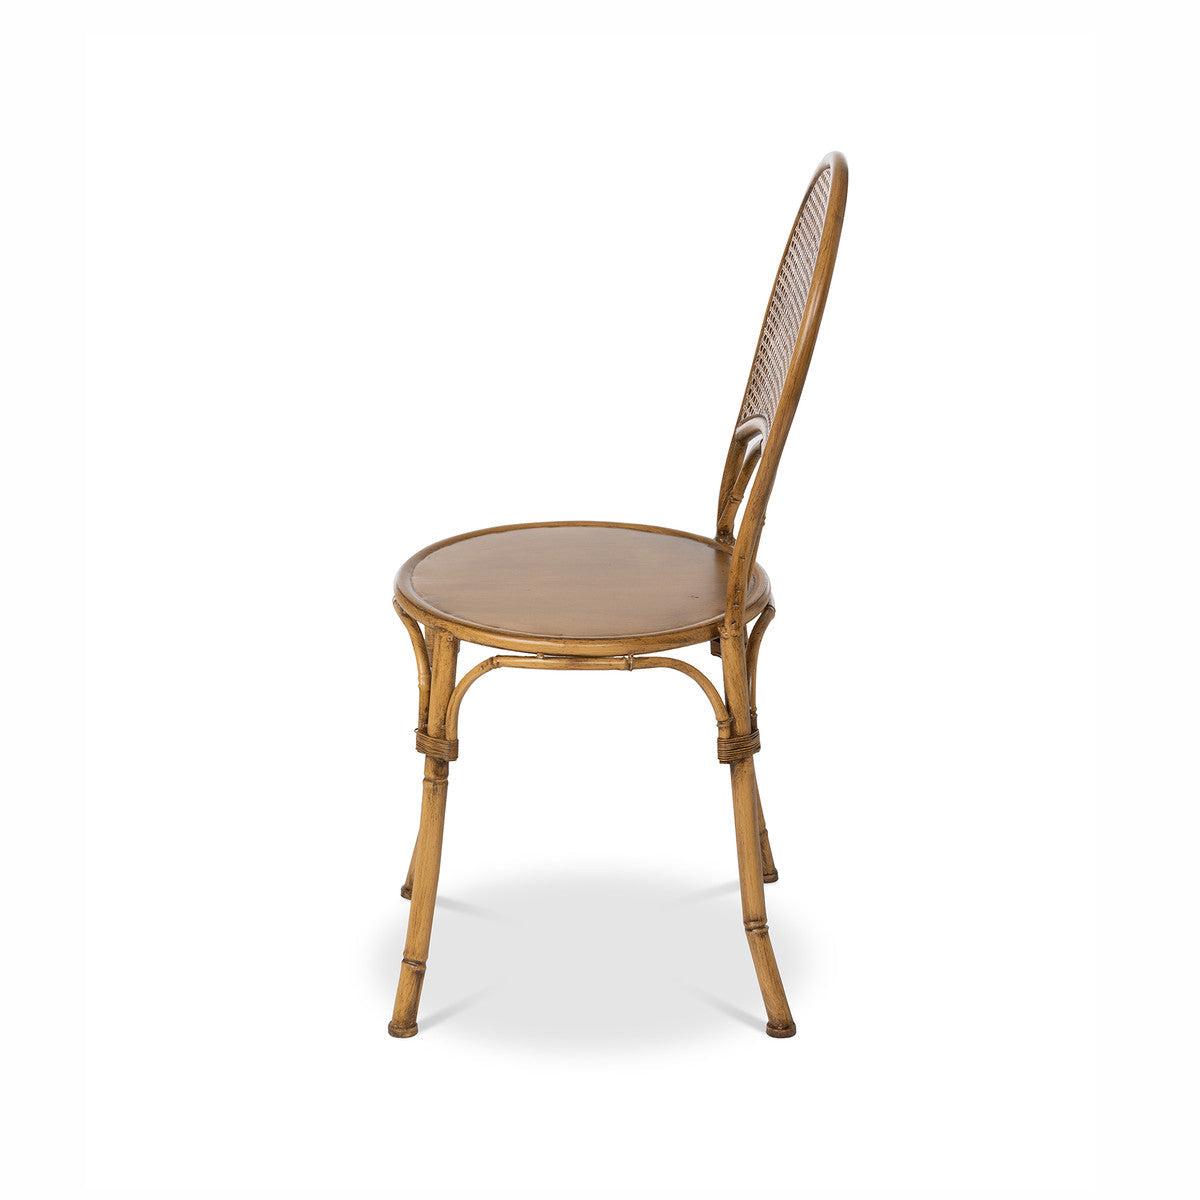 Metal Bamboo Bistro Chair